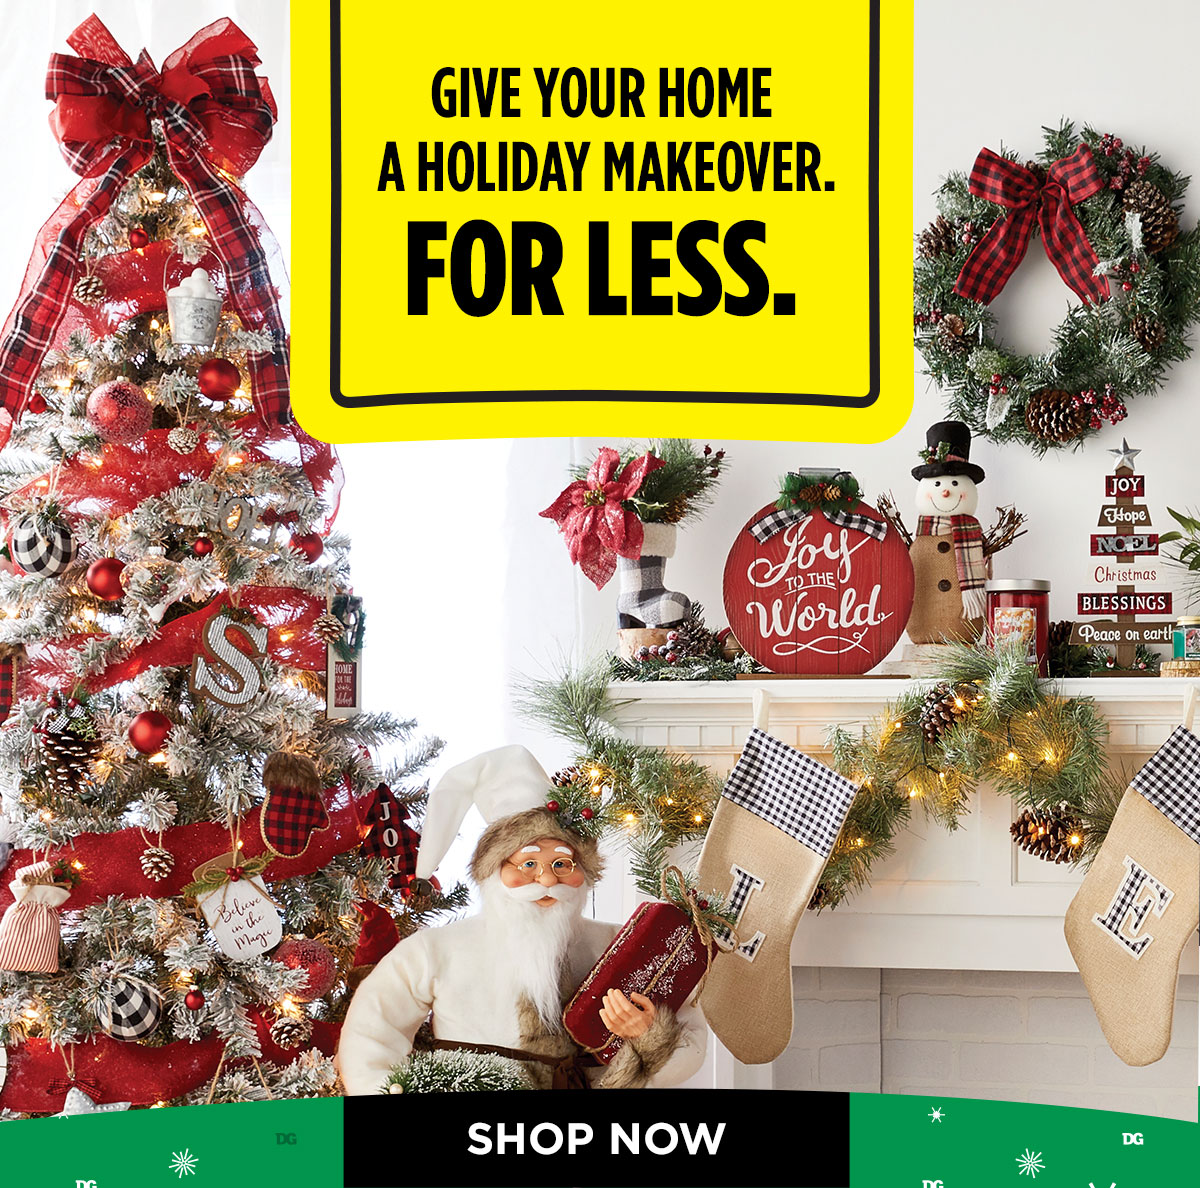 Give your home a Holiday makeover for less. SHOP NOW.